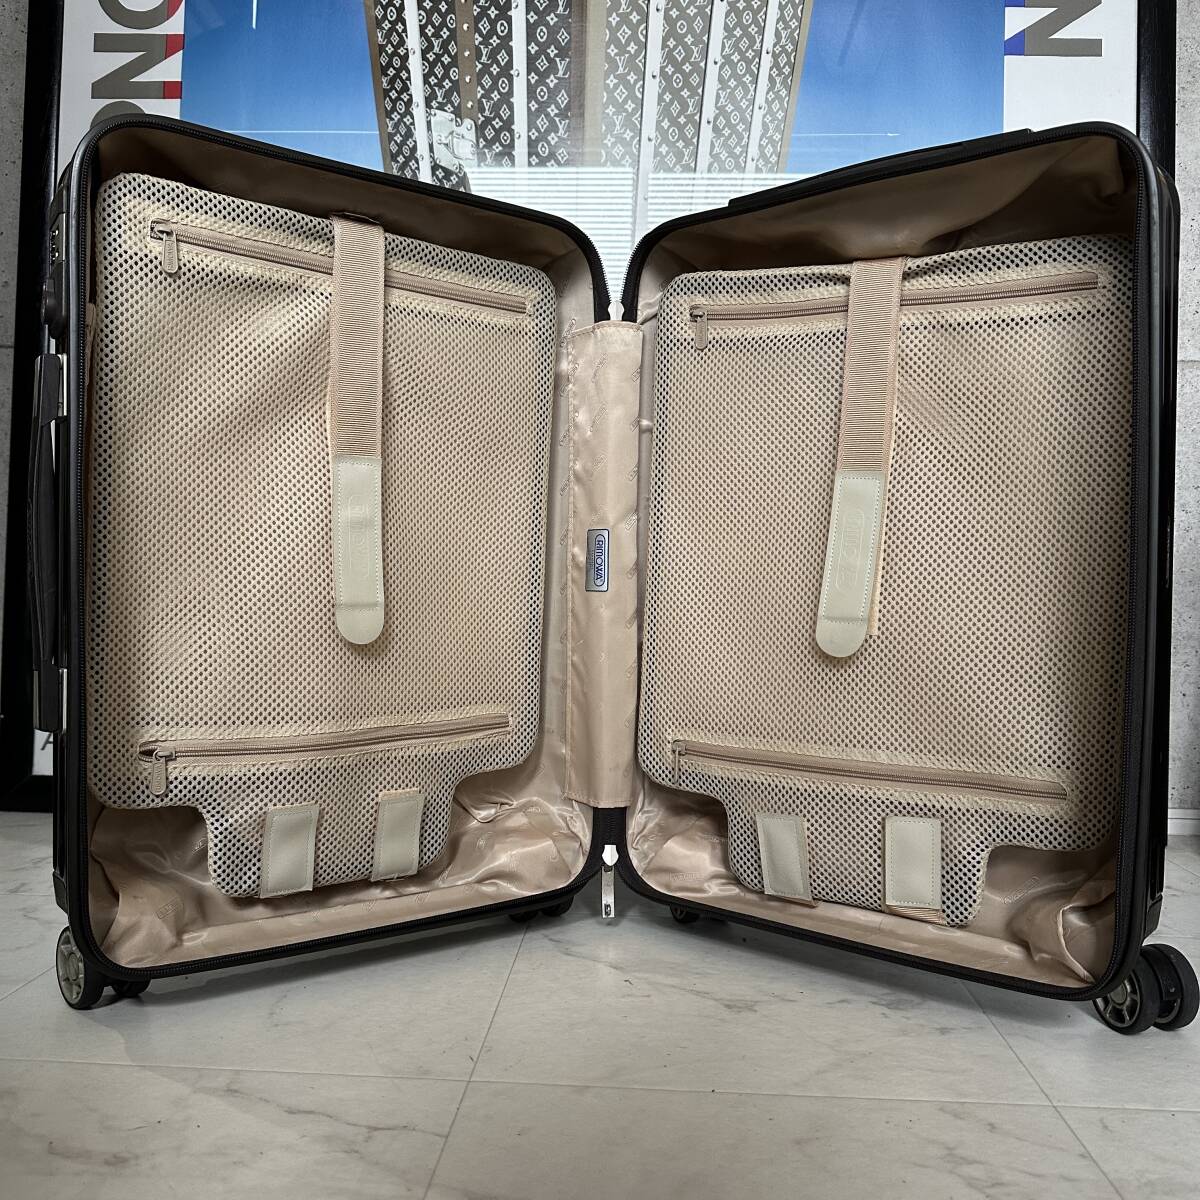 [ prompt decision / immediate payment ] machine inside bringing in size RIMOWA SALSA DELUXE HYBRID Rimowa salsa Deluxe hybrid suitcase bulkhead .2 sheets equipping Brown 